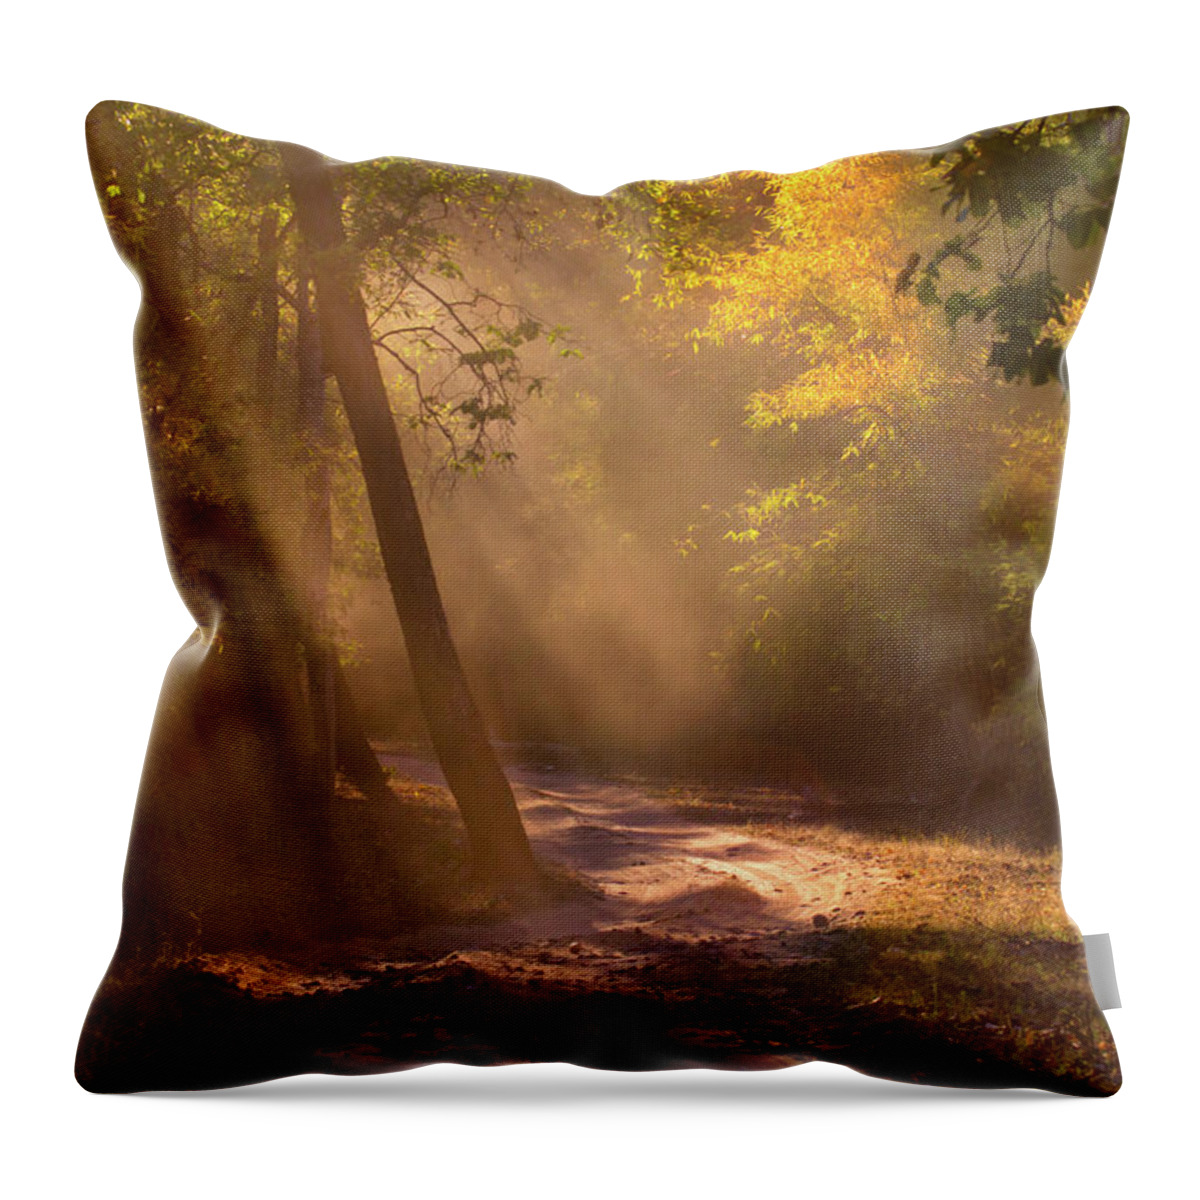 Scenics Throw Pillow featuring the photograph Sunbeams In Bandhavgarh Forest by Adria  Photography